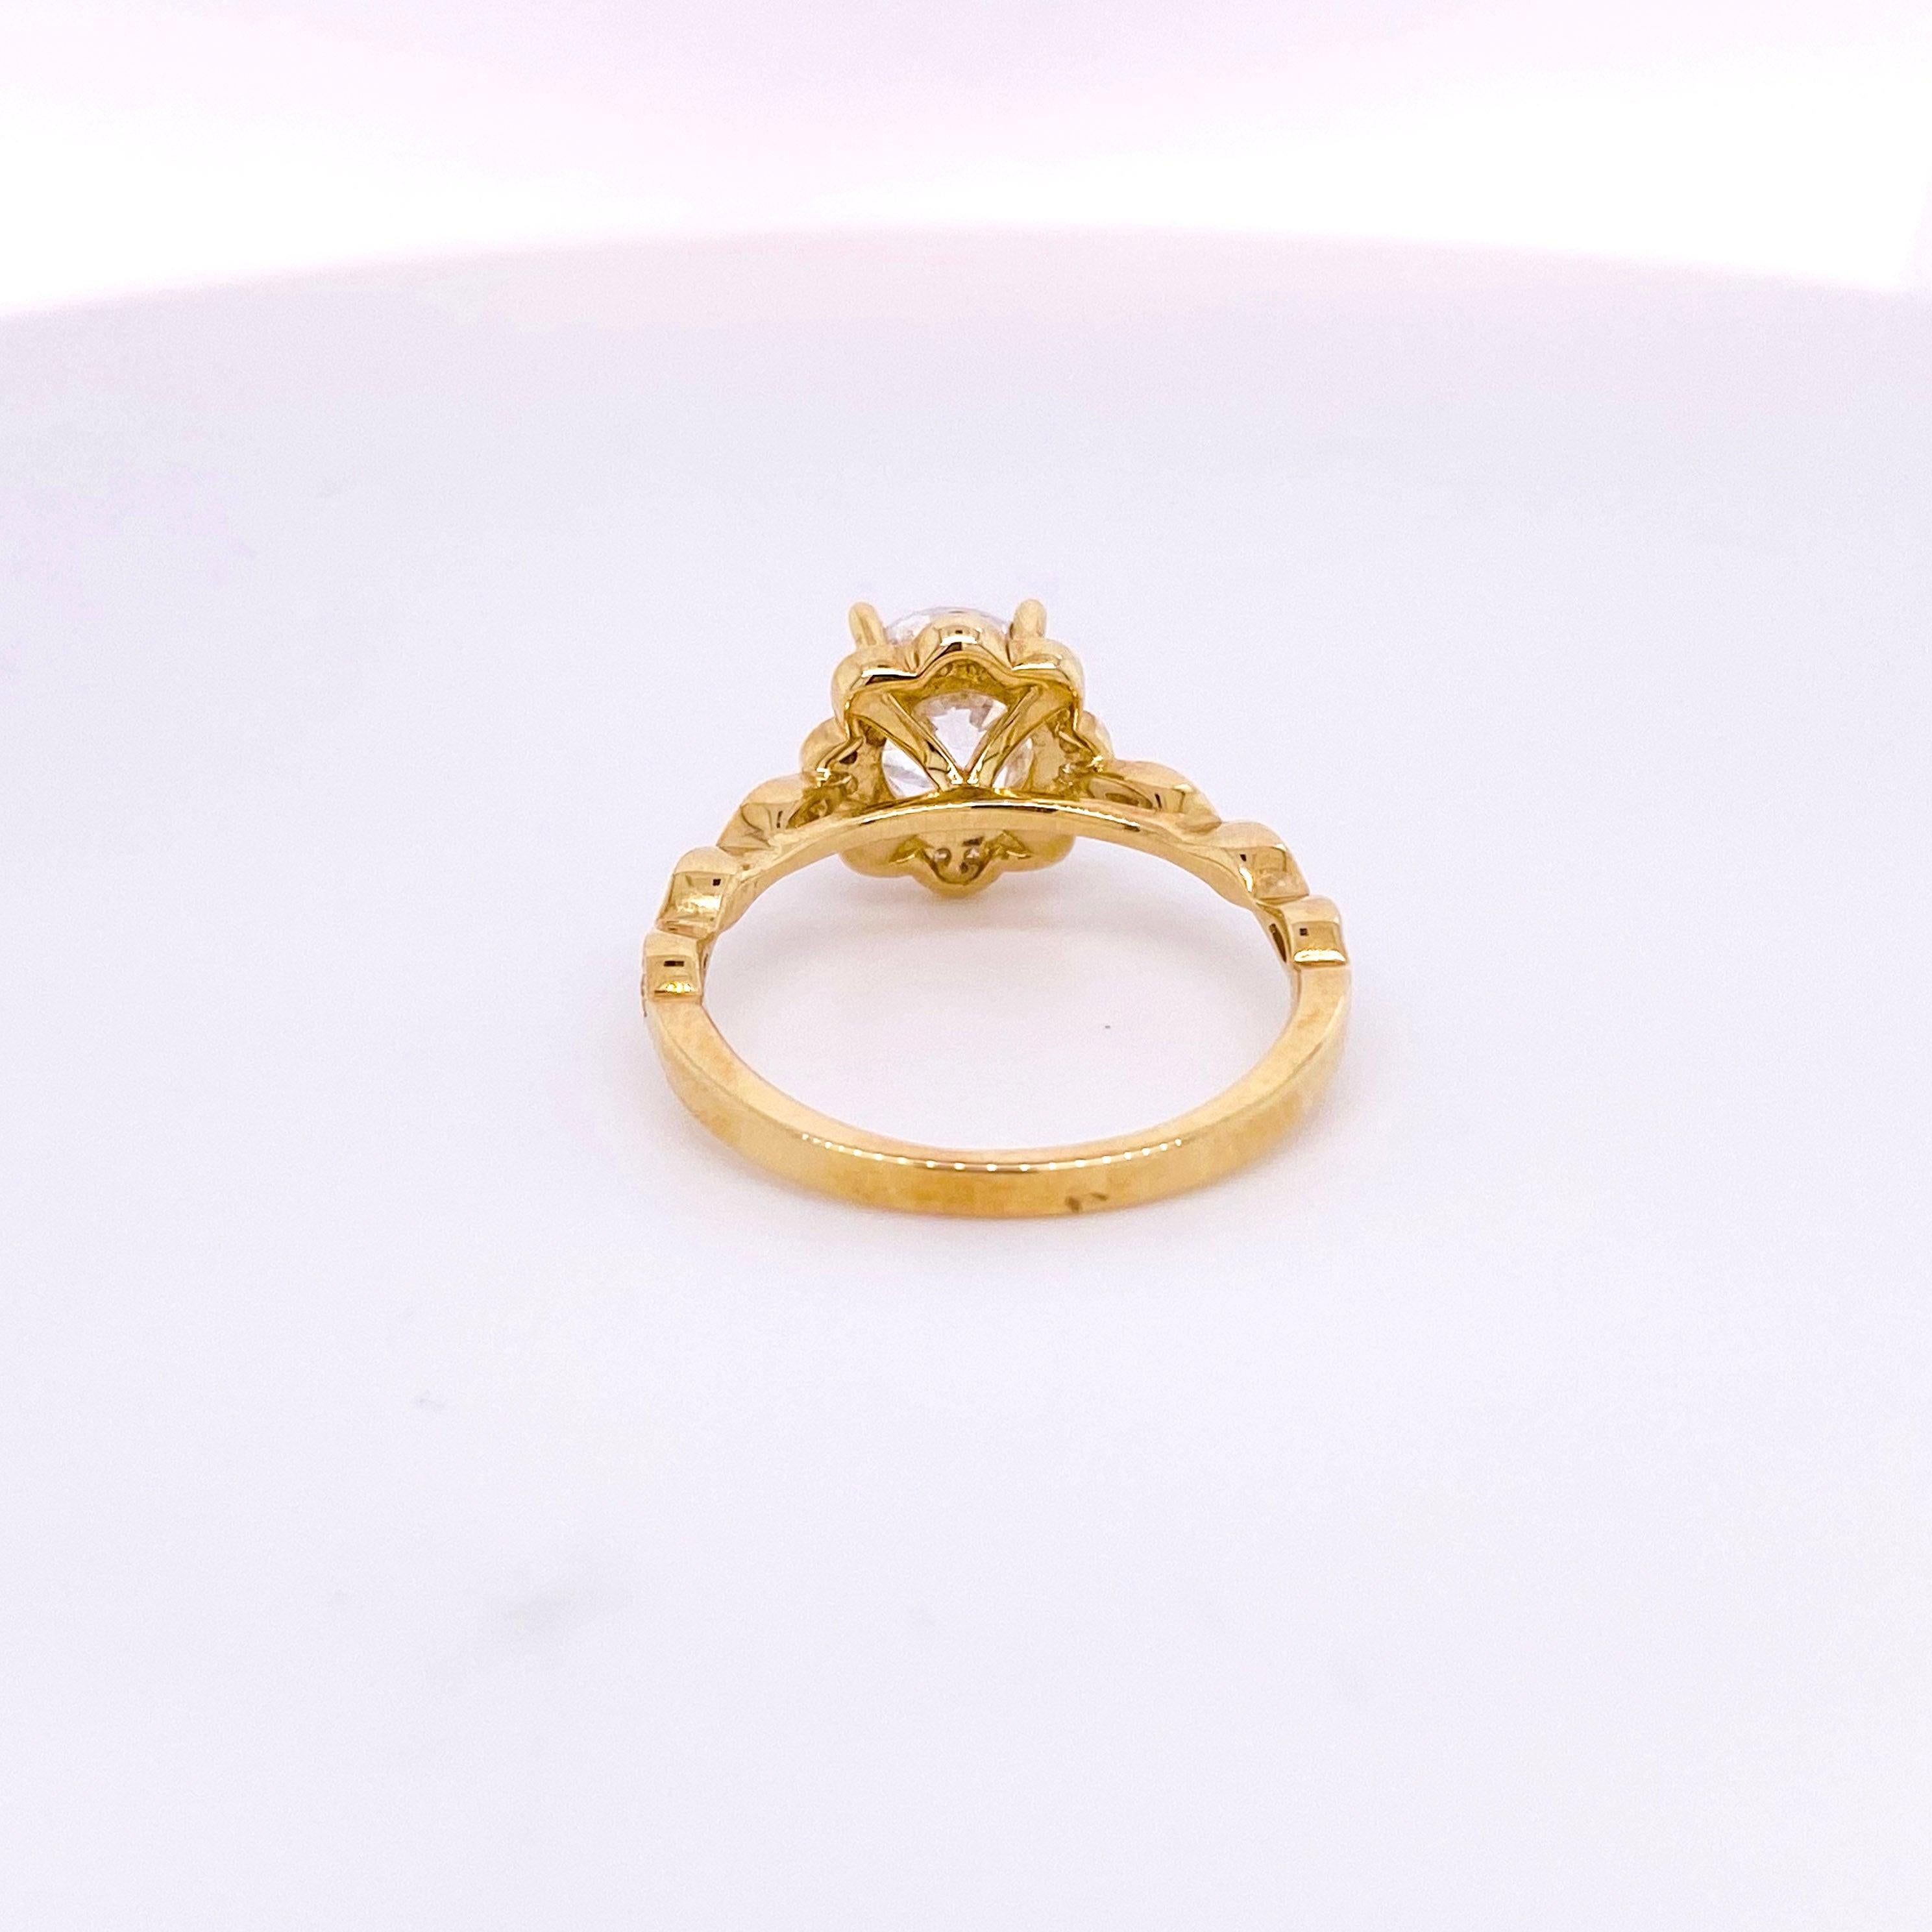 For Sale:  One Carat Diamond Engagement Ring, Flower Halo, Yellow Gold, Nature Inspired 4